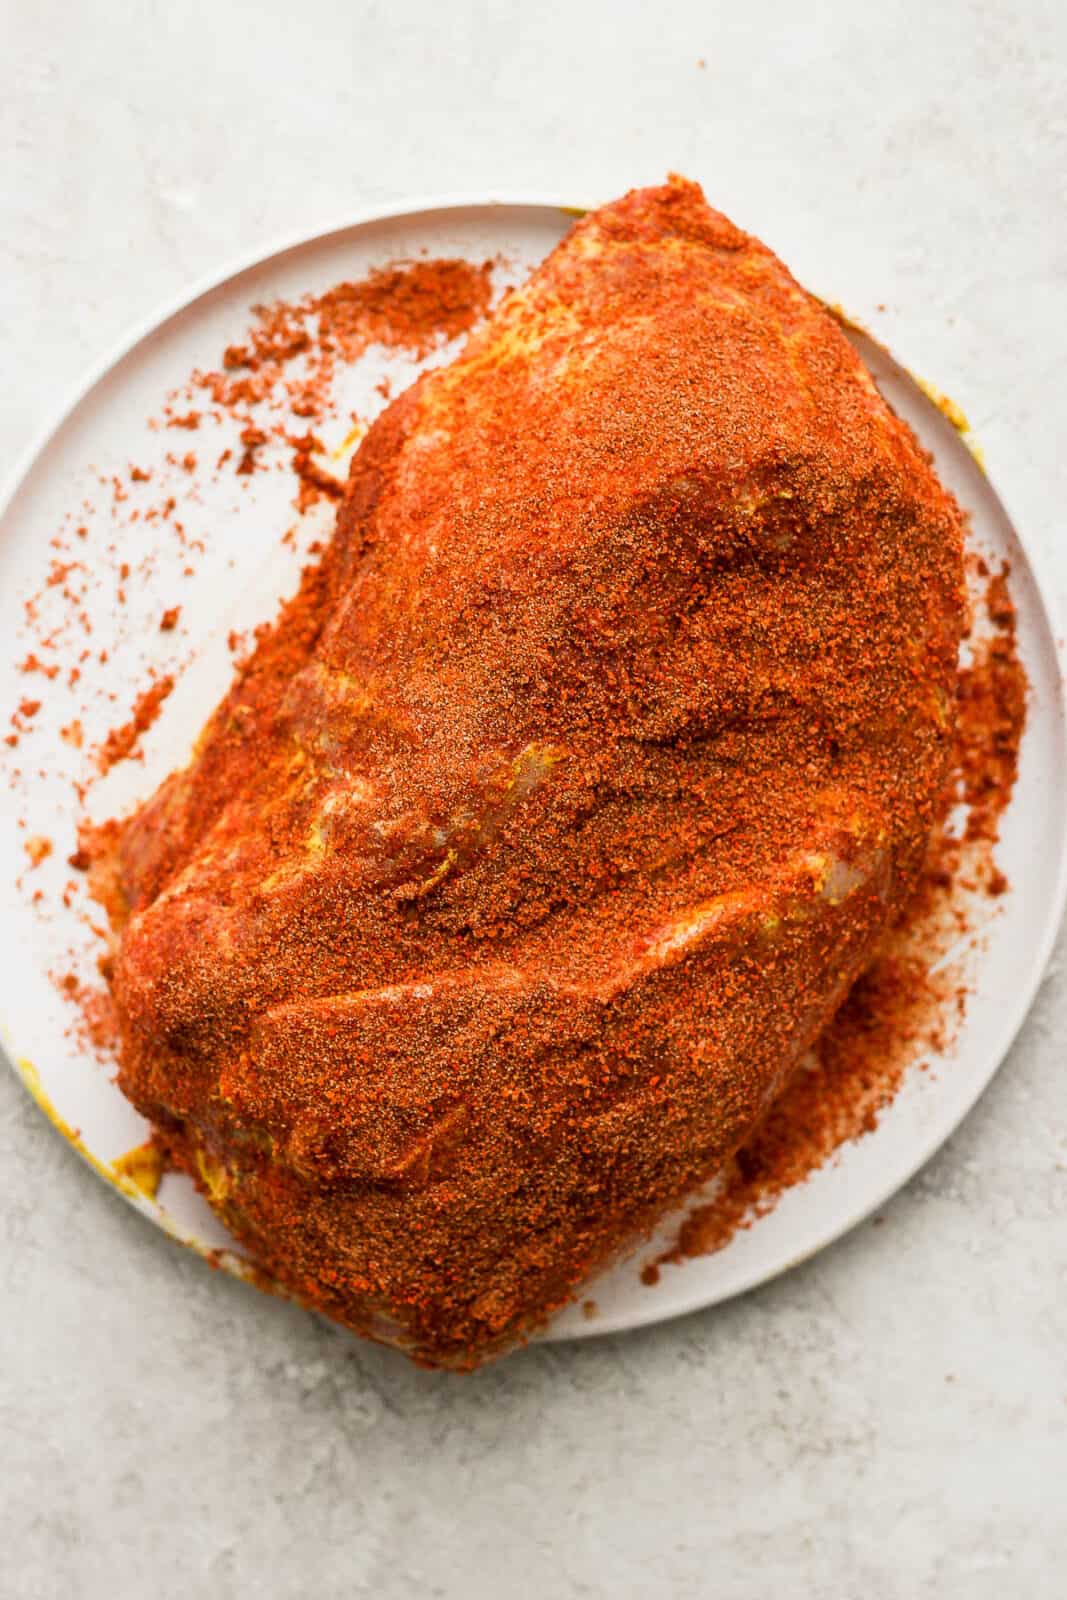 A pork shoulder coated with a homemade dry rub on a plate.